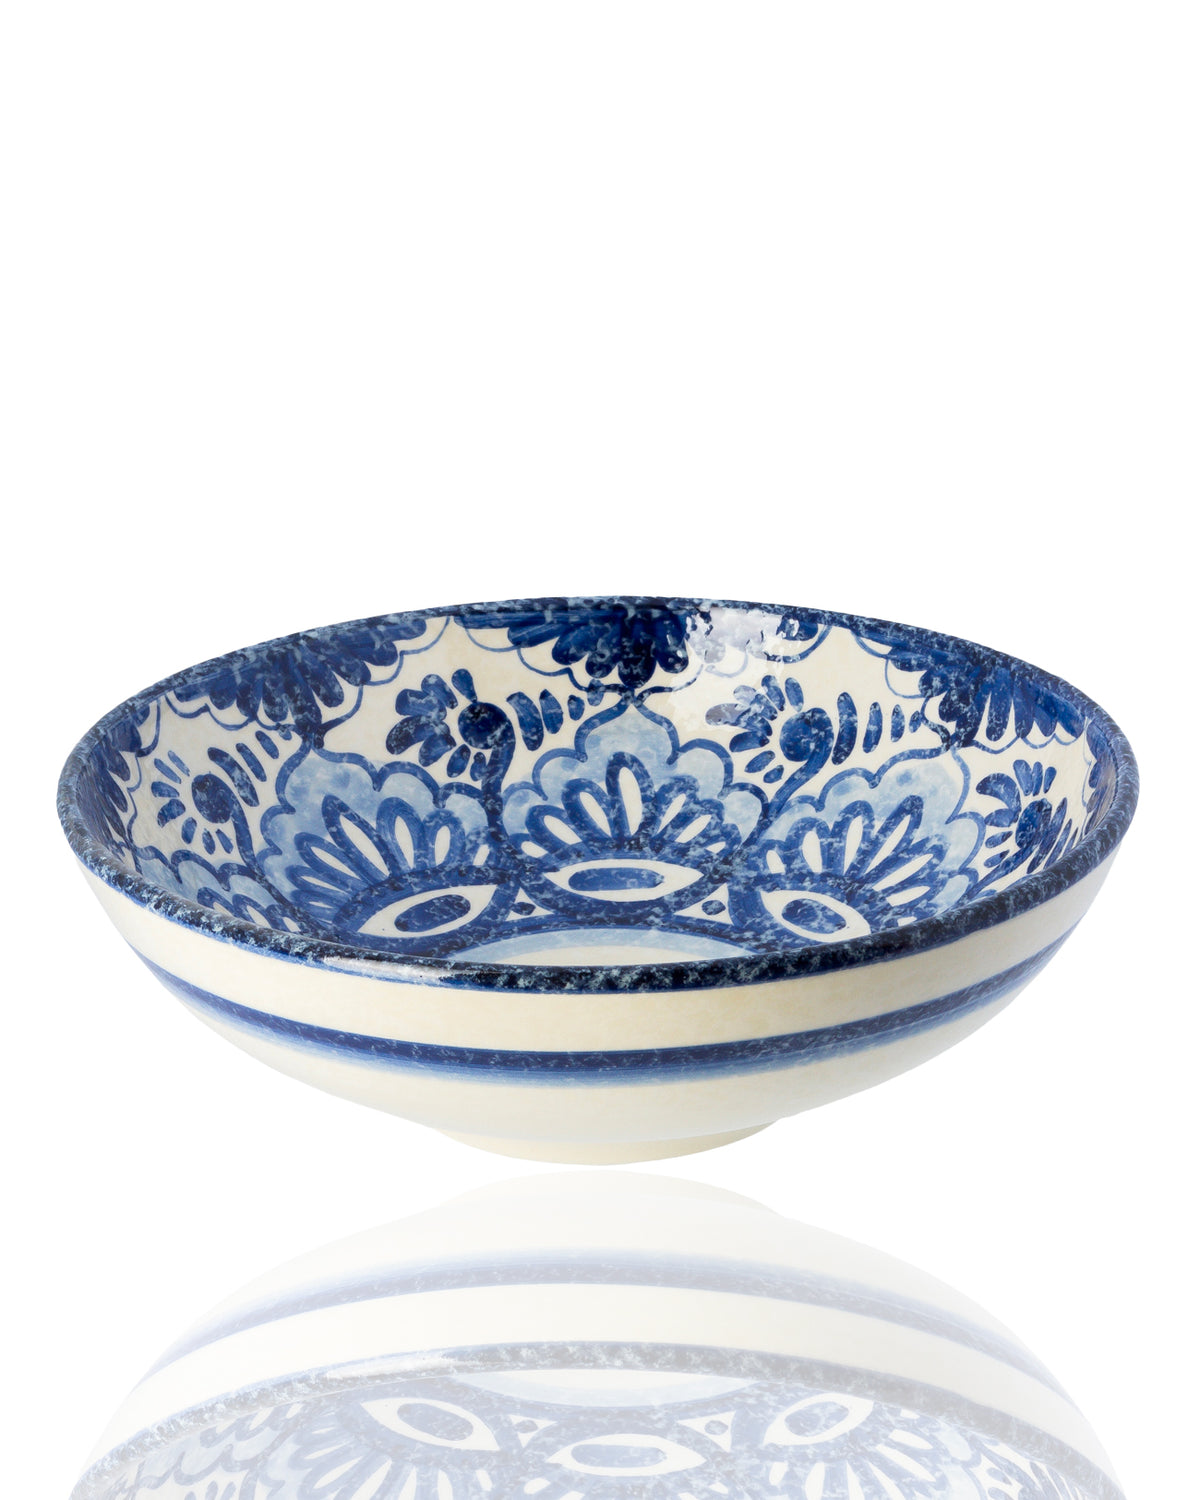 Andalusia Serving Bowl